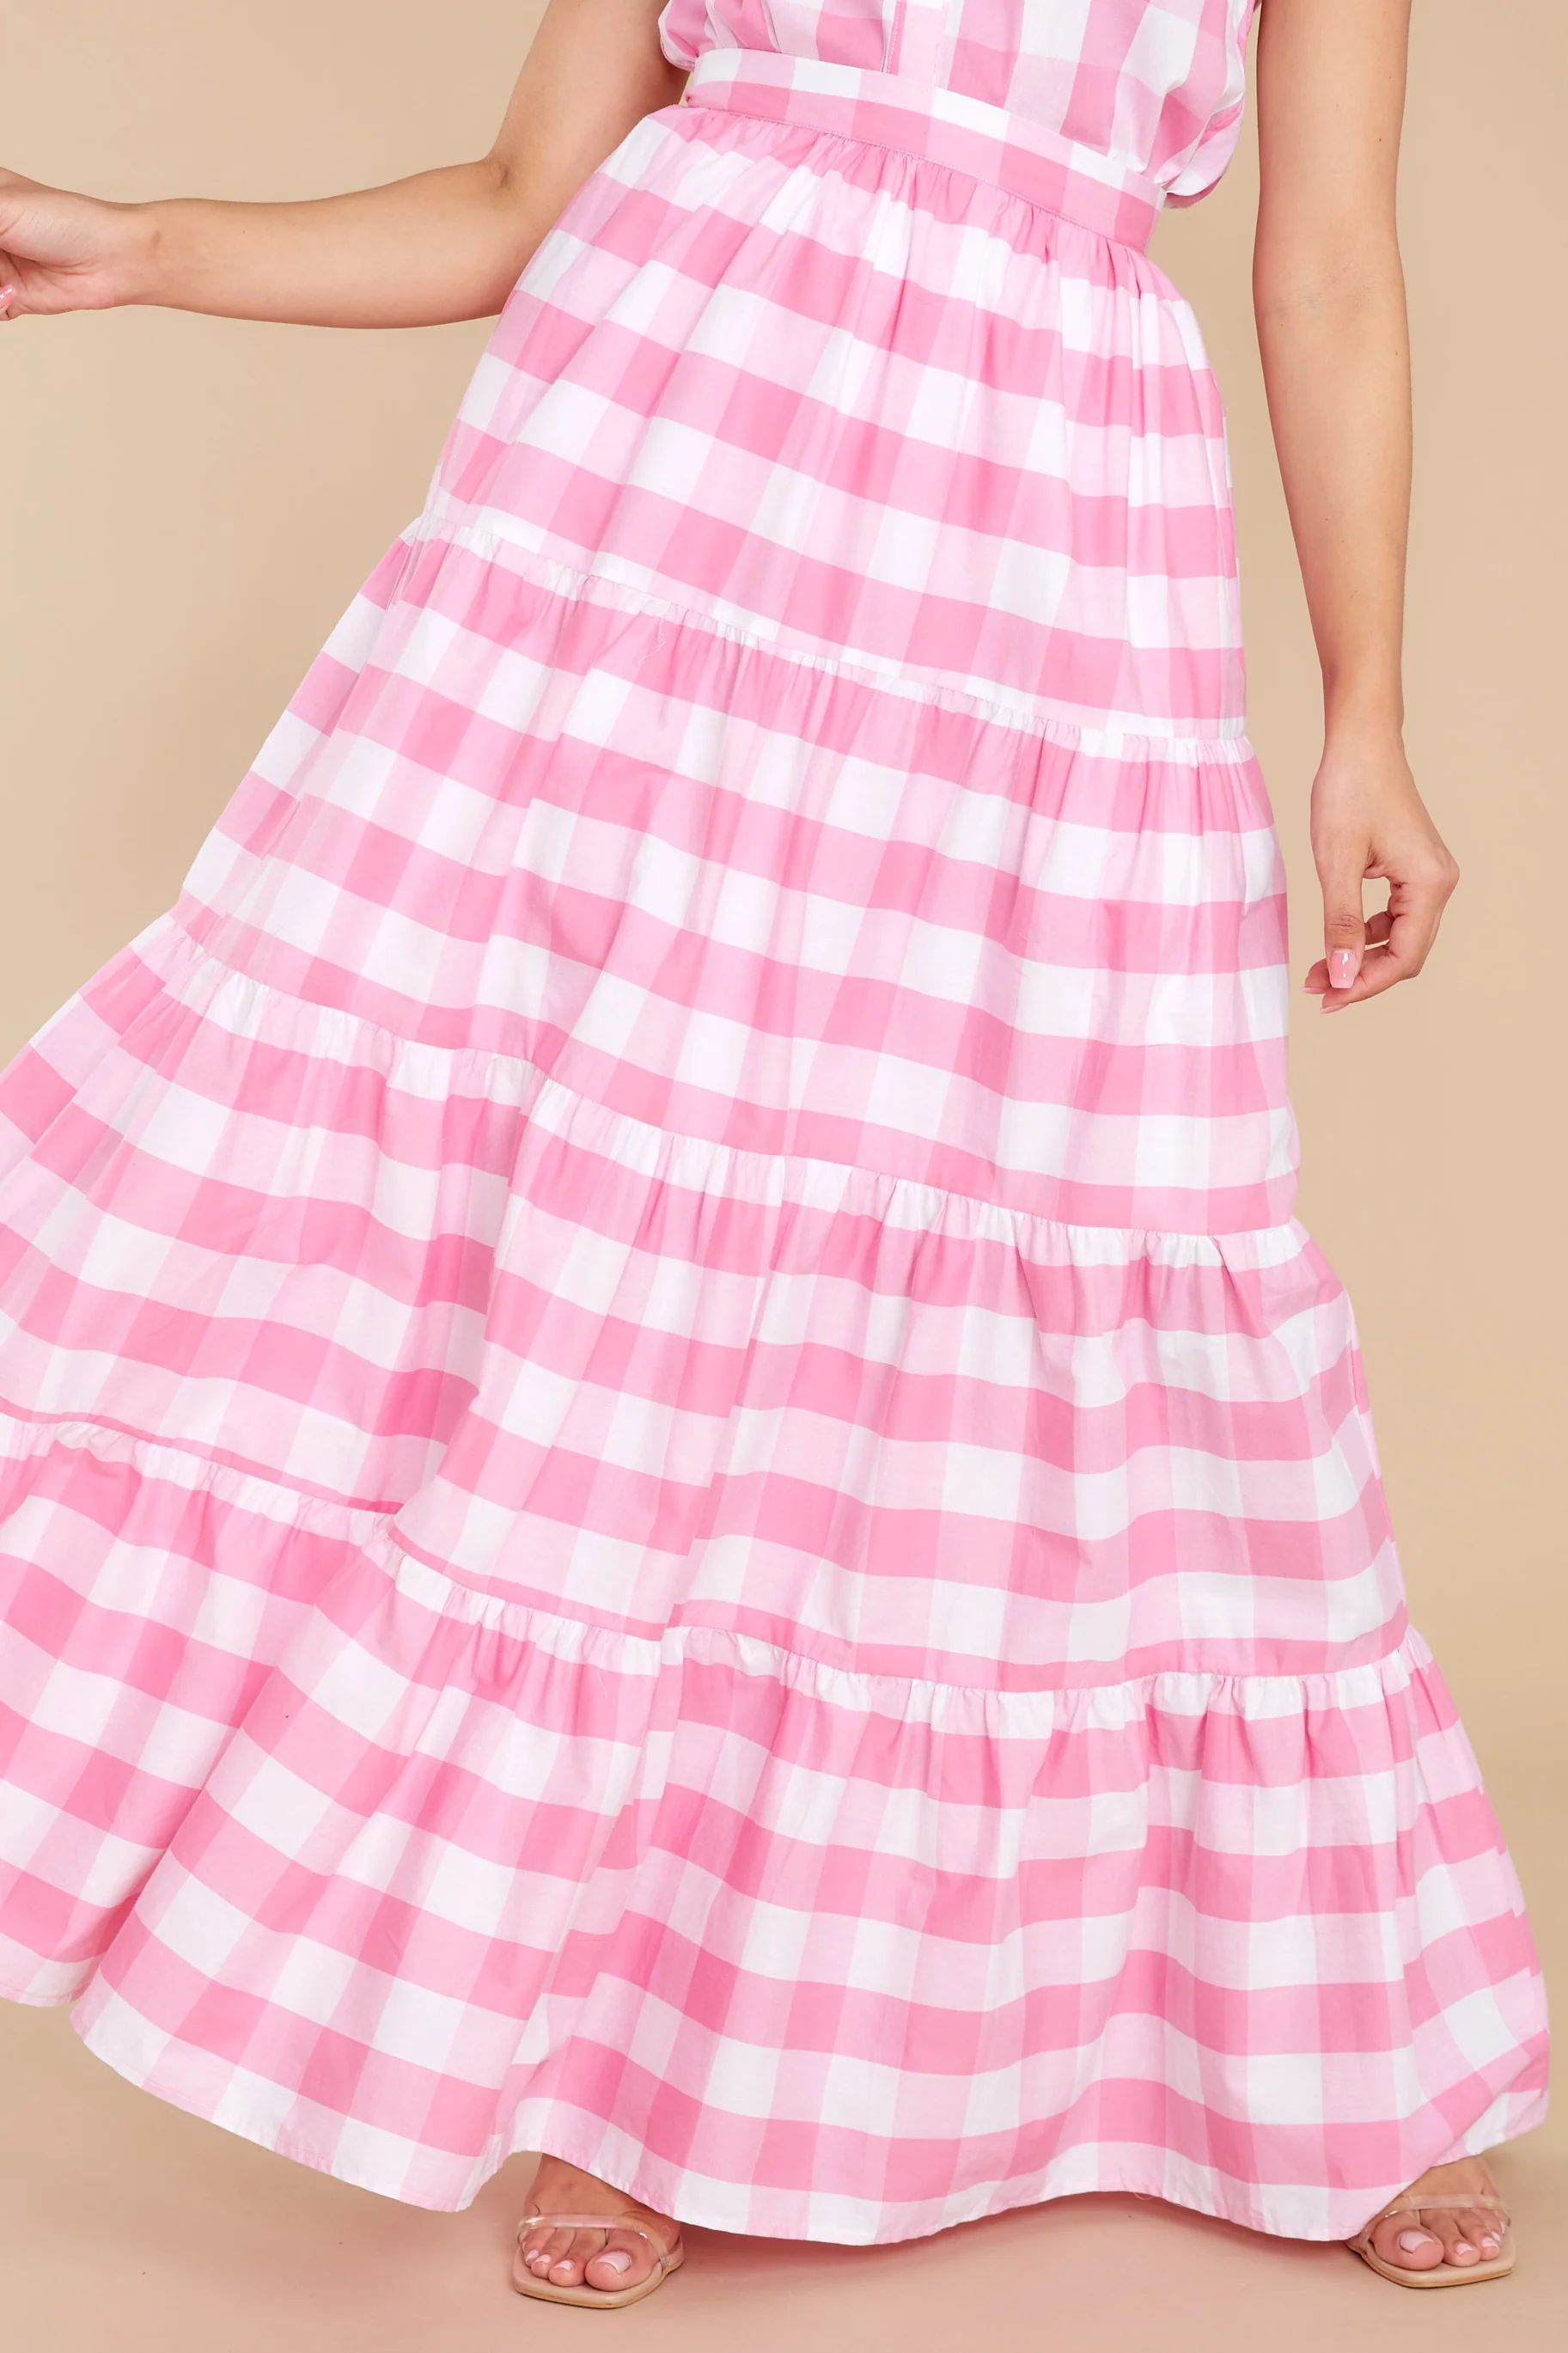 Too Much To Say Pink Gingham Skirt | Red Dress 